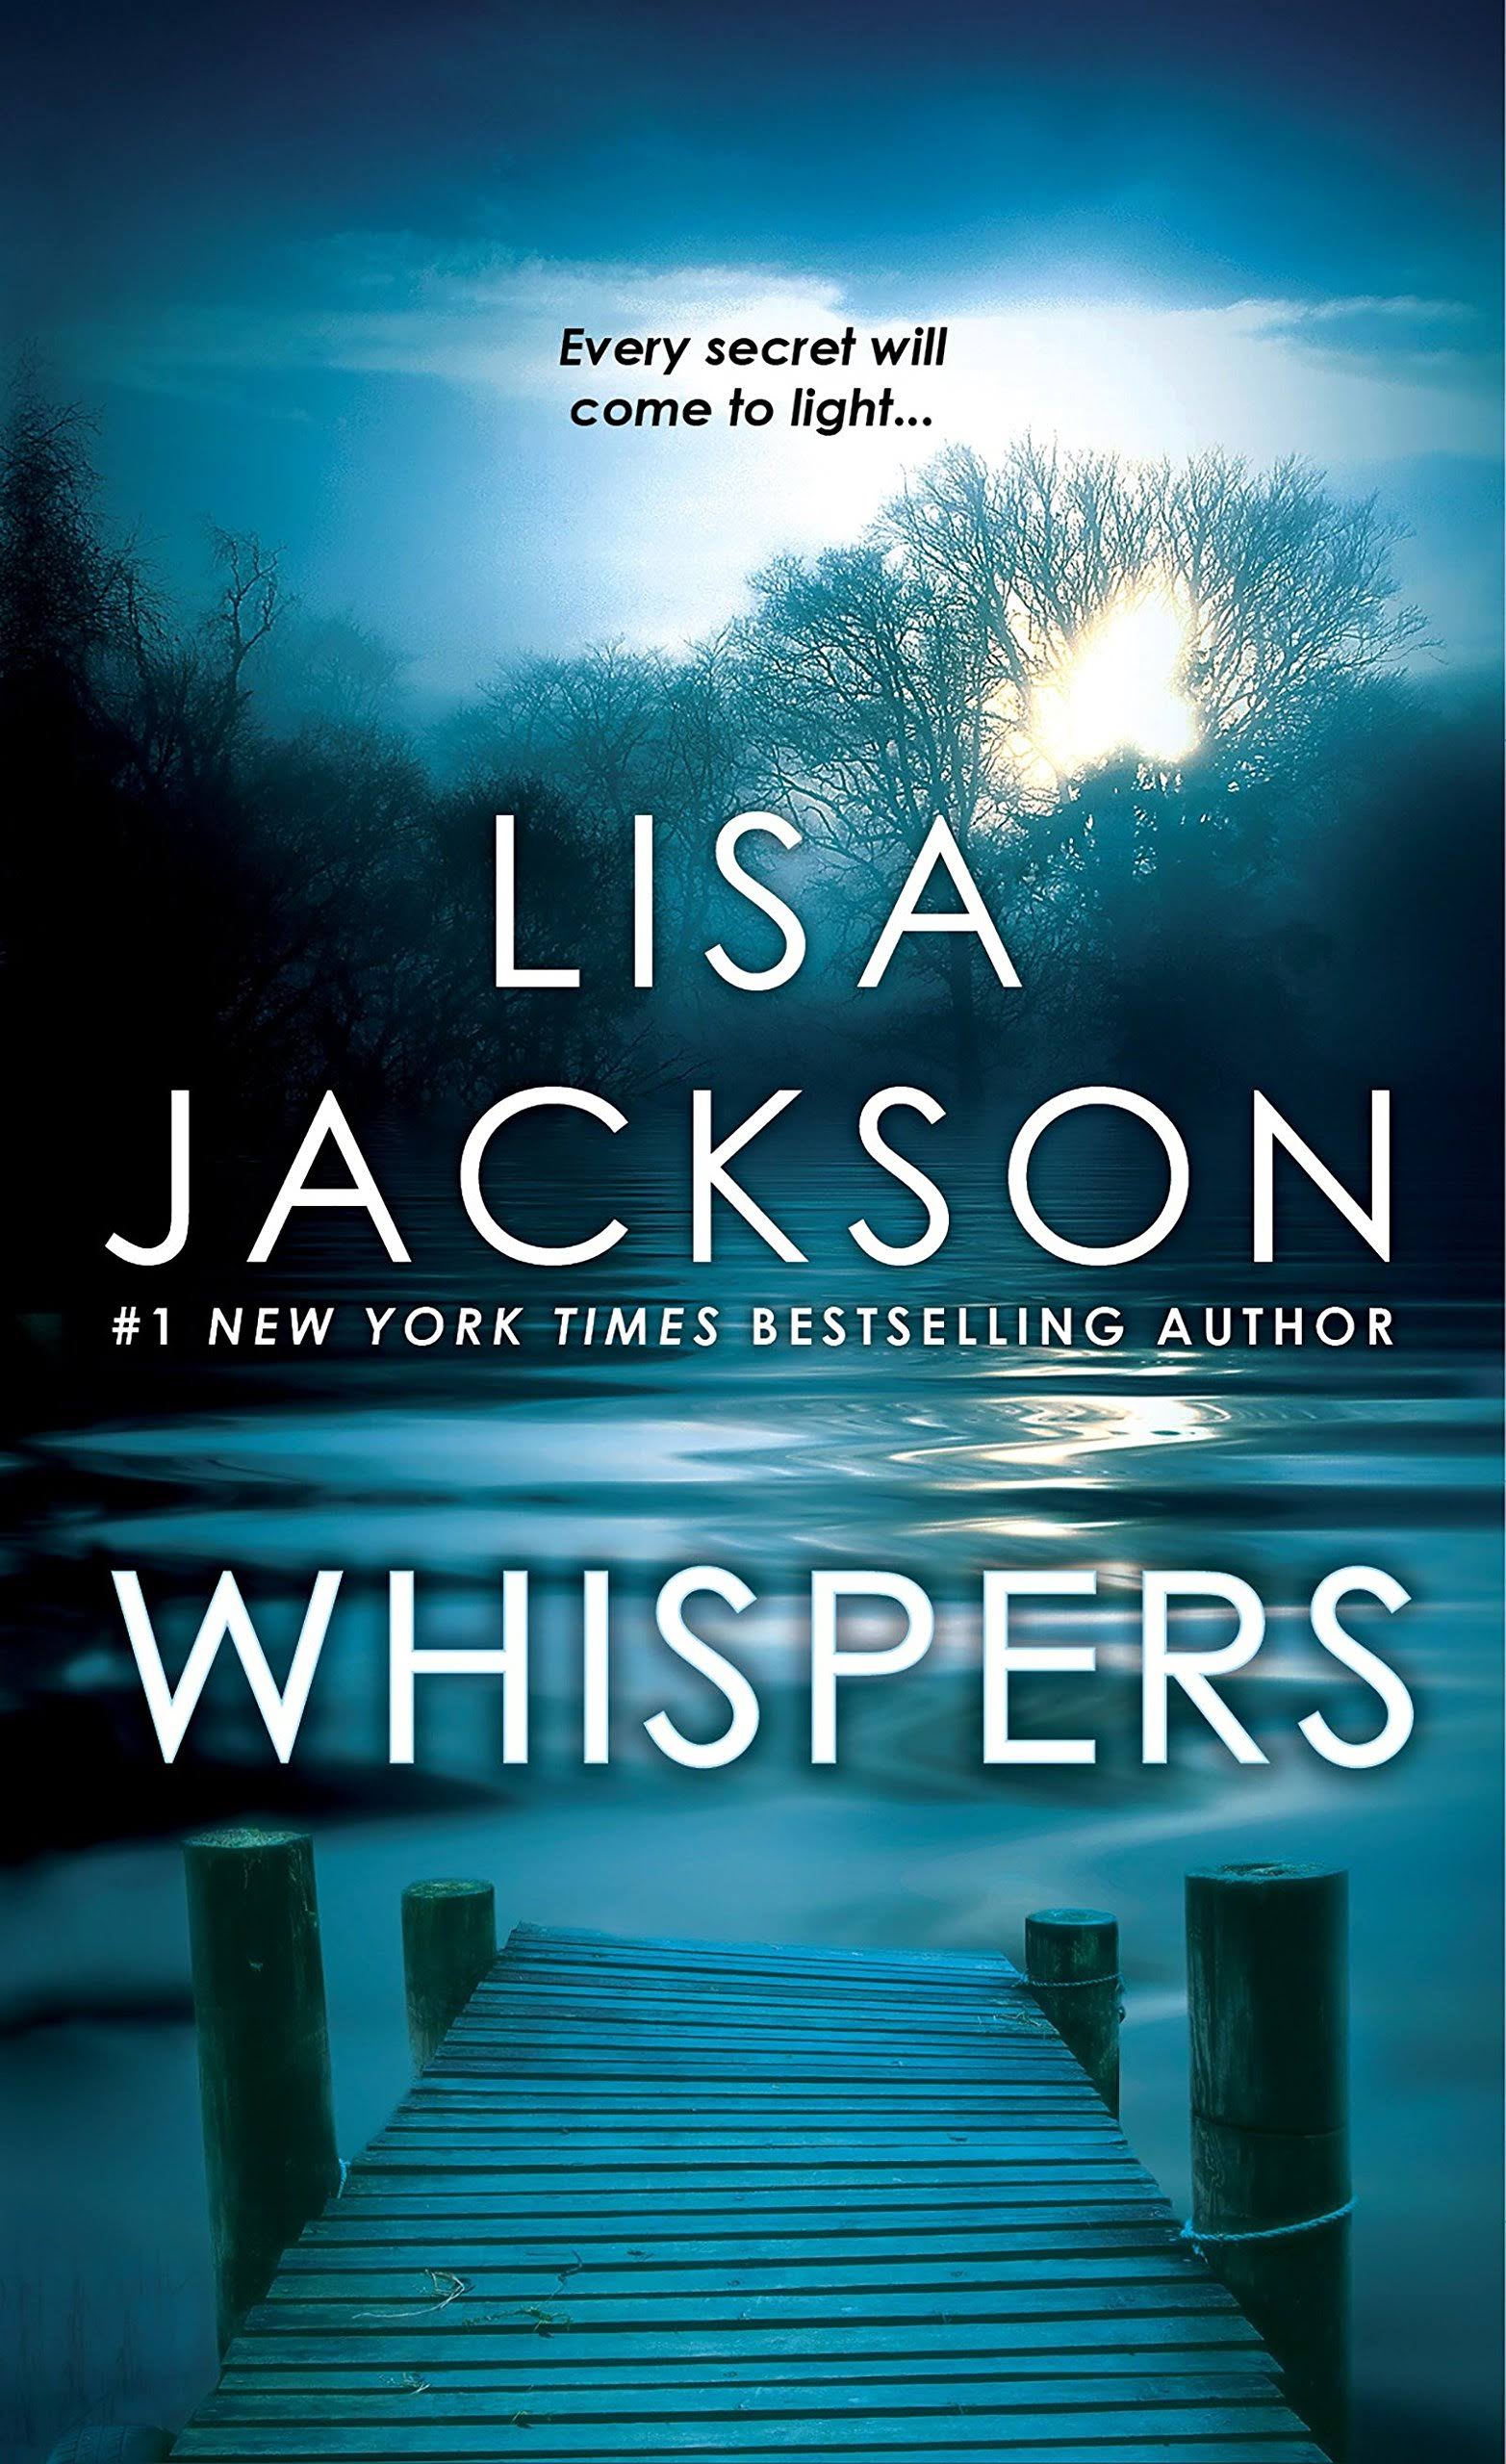 Whispers [Book]